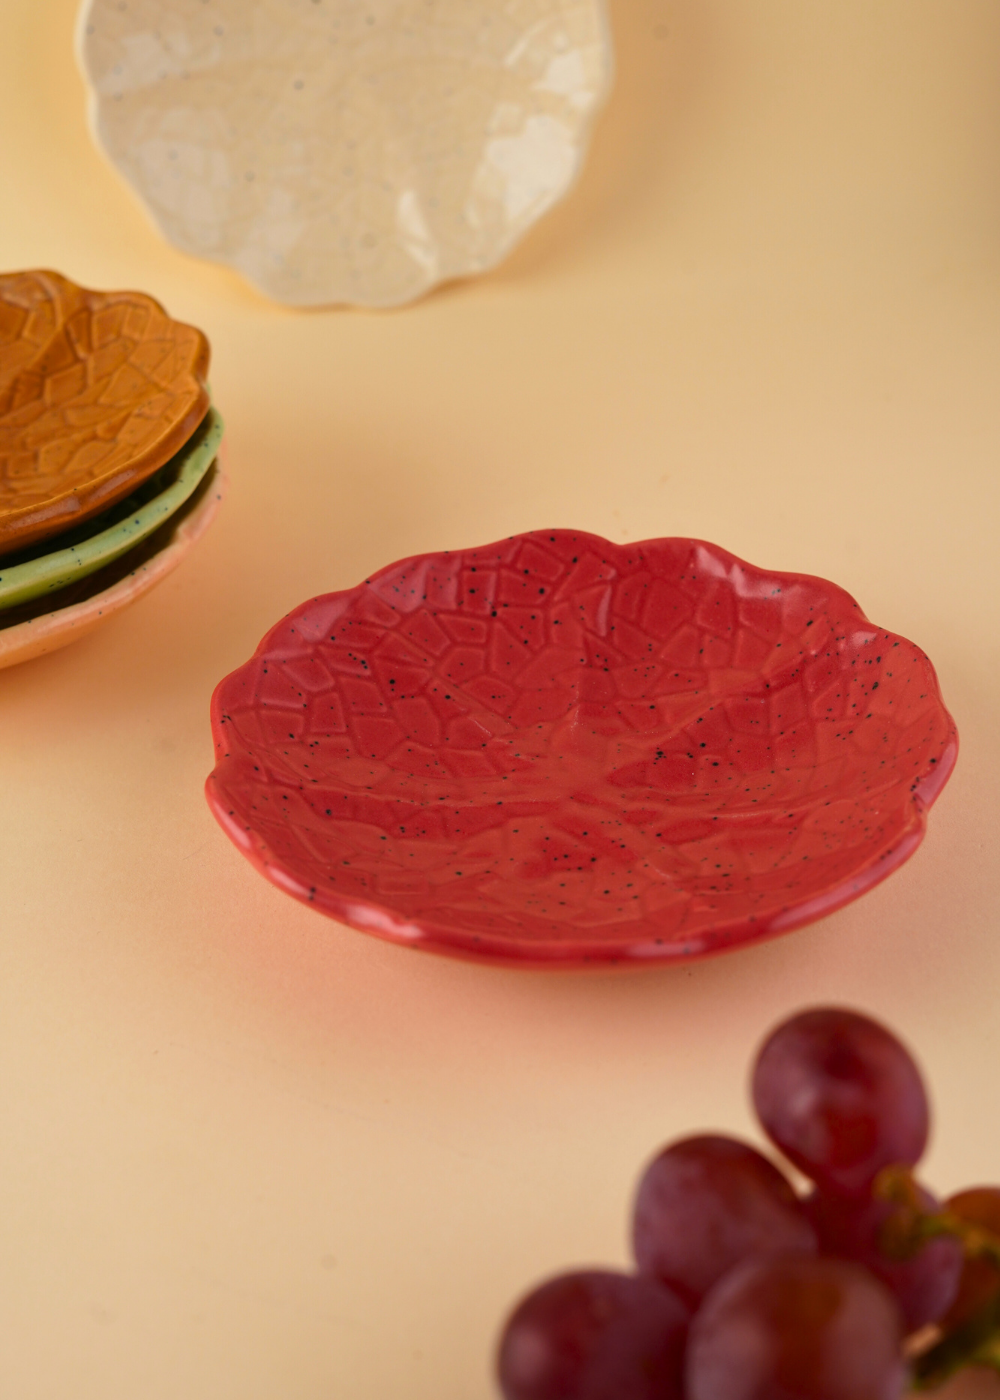 handmade red cabbage dessert plate with premium red color